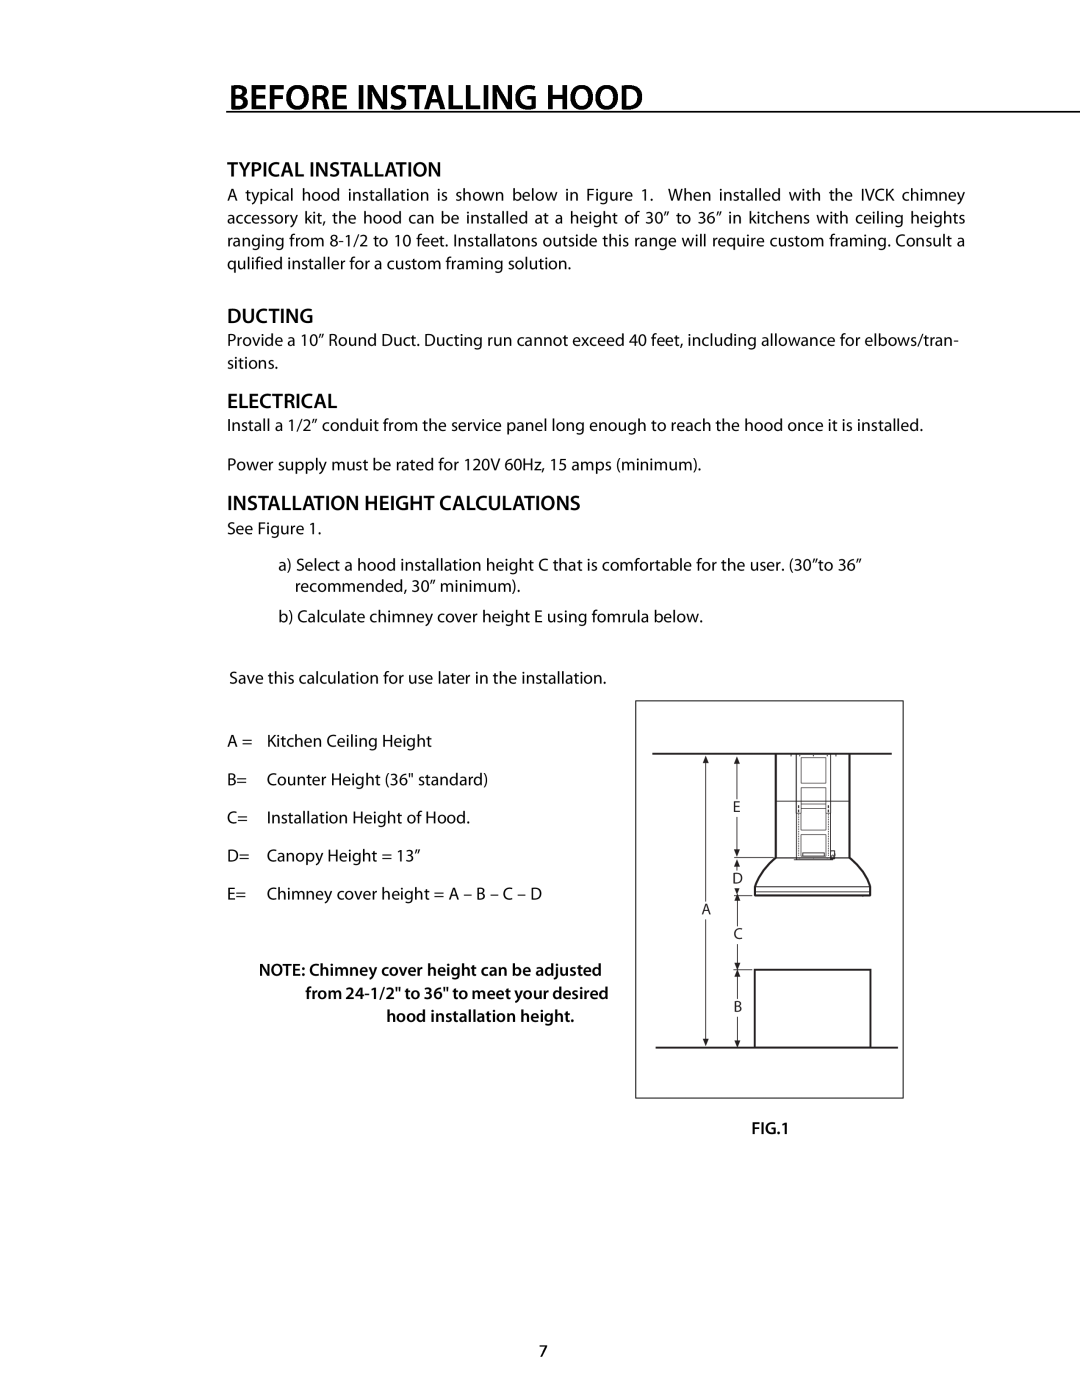 DCS 221712 manual Typical Installation, Ducting, Electrical, Installation Height Calculations, Before Installing Hood 